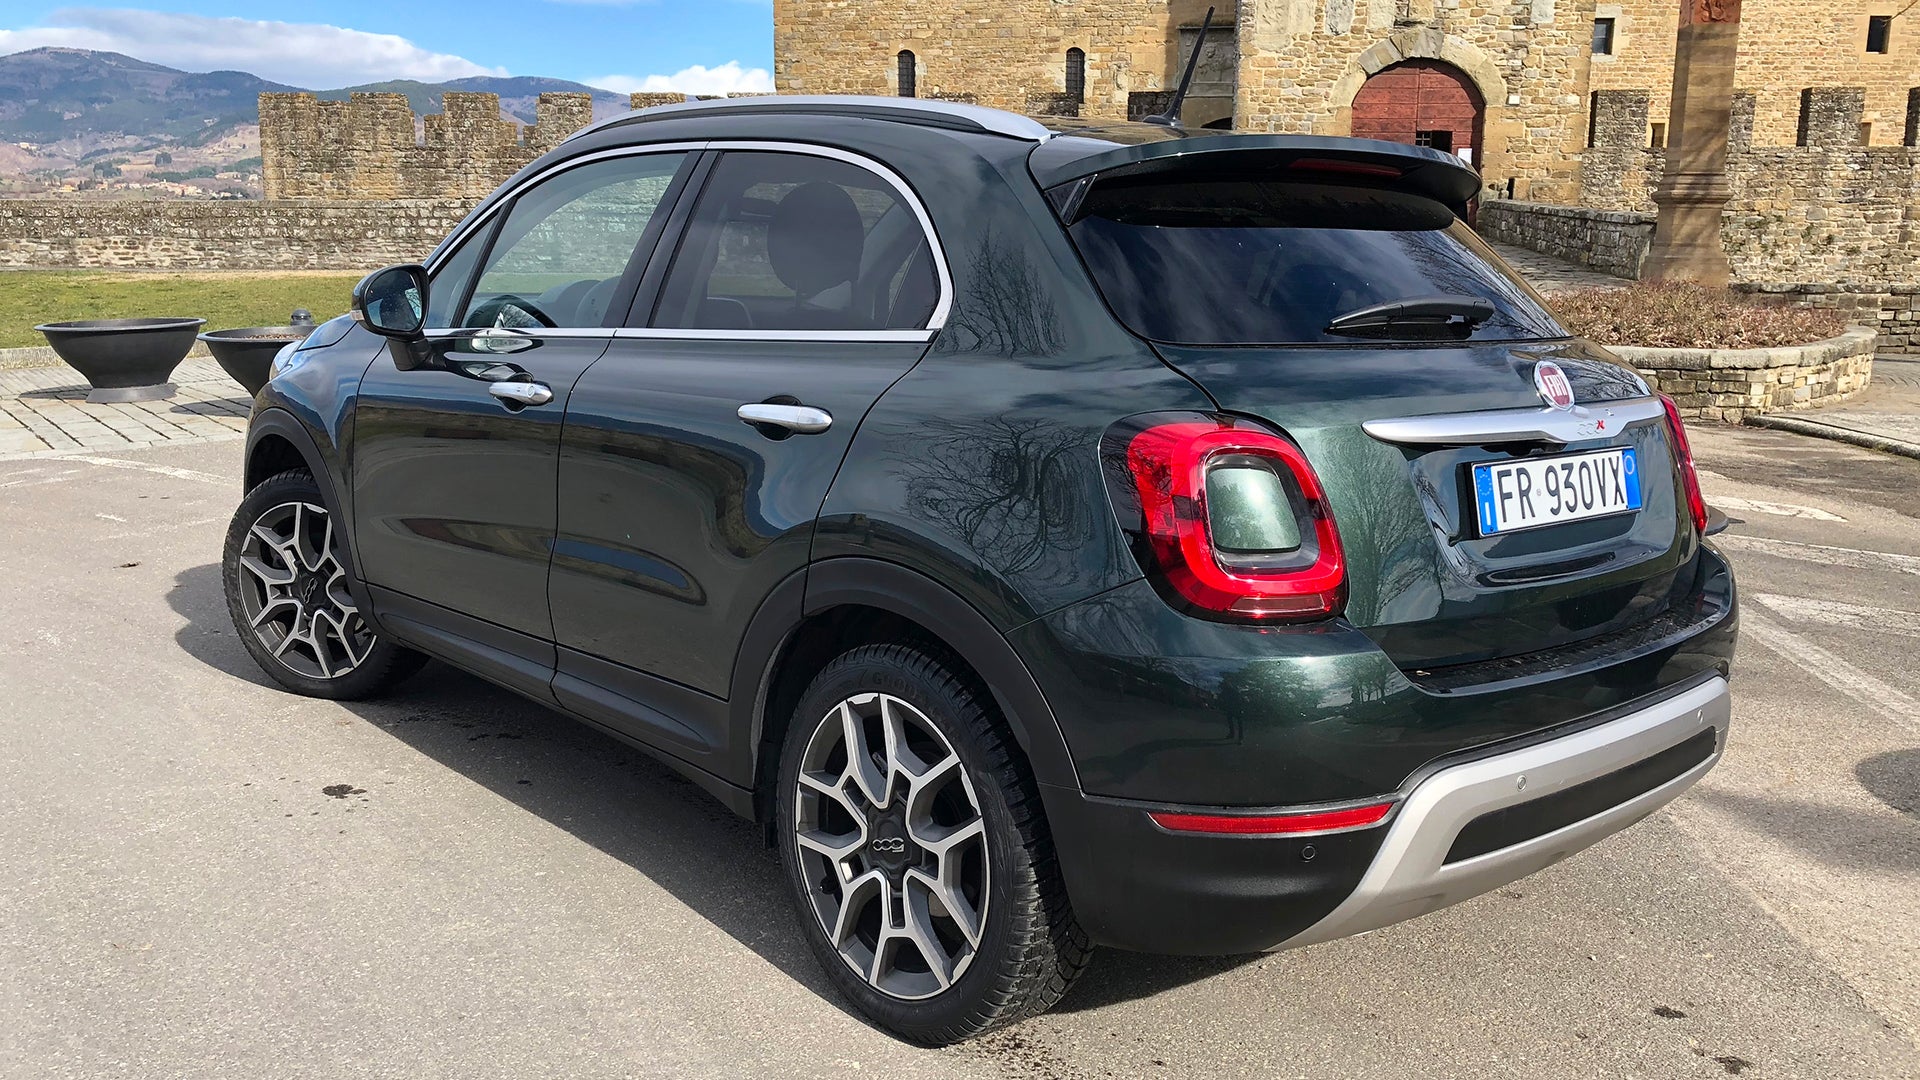 2019 Fiat 500X New Dad Review: A European-Sized Crossover Proves a Delight  in Italy